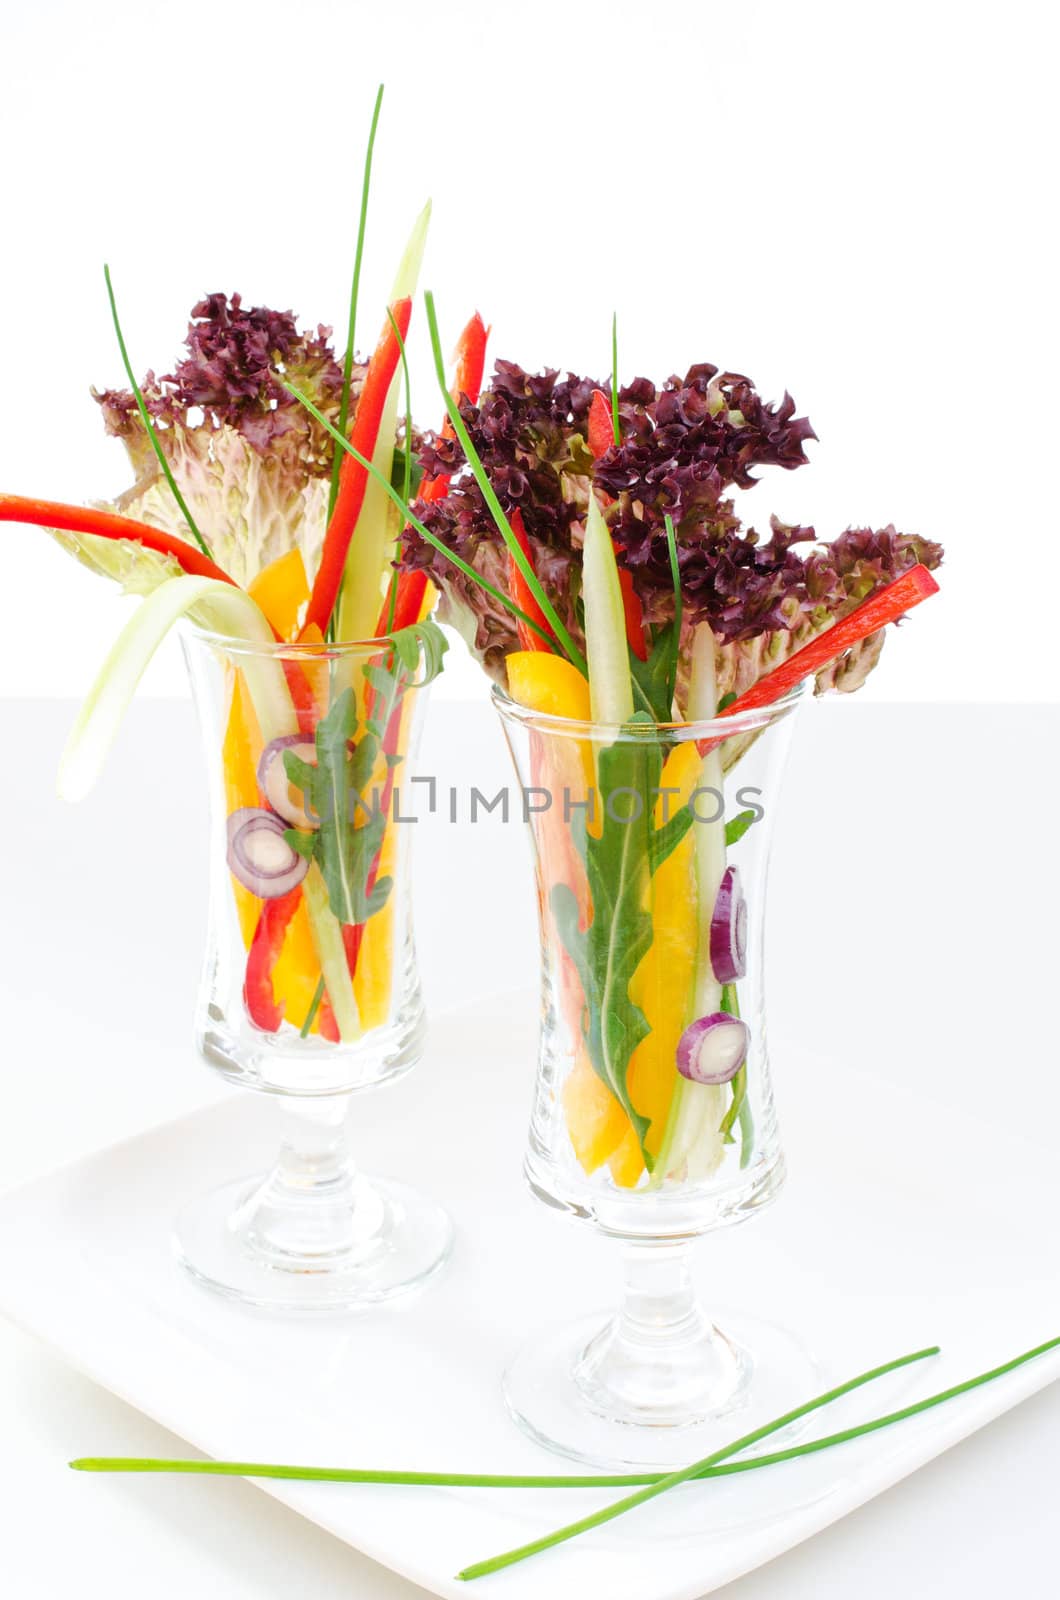 Cutted vegetables in a glasses by Nanisimova